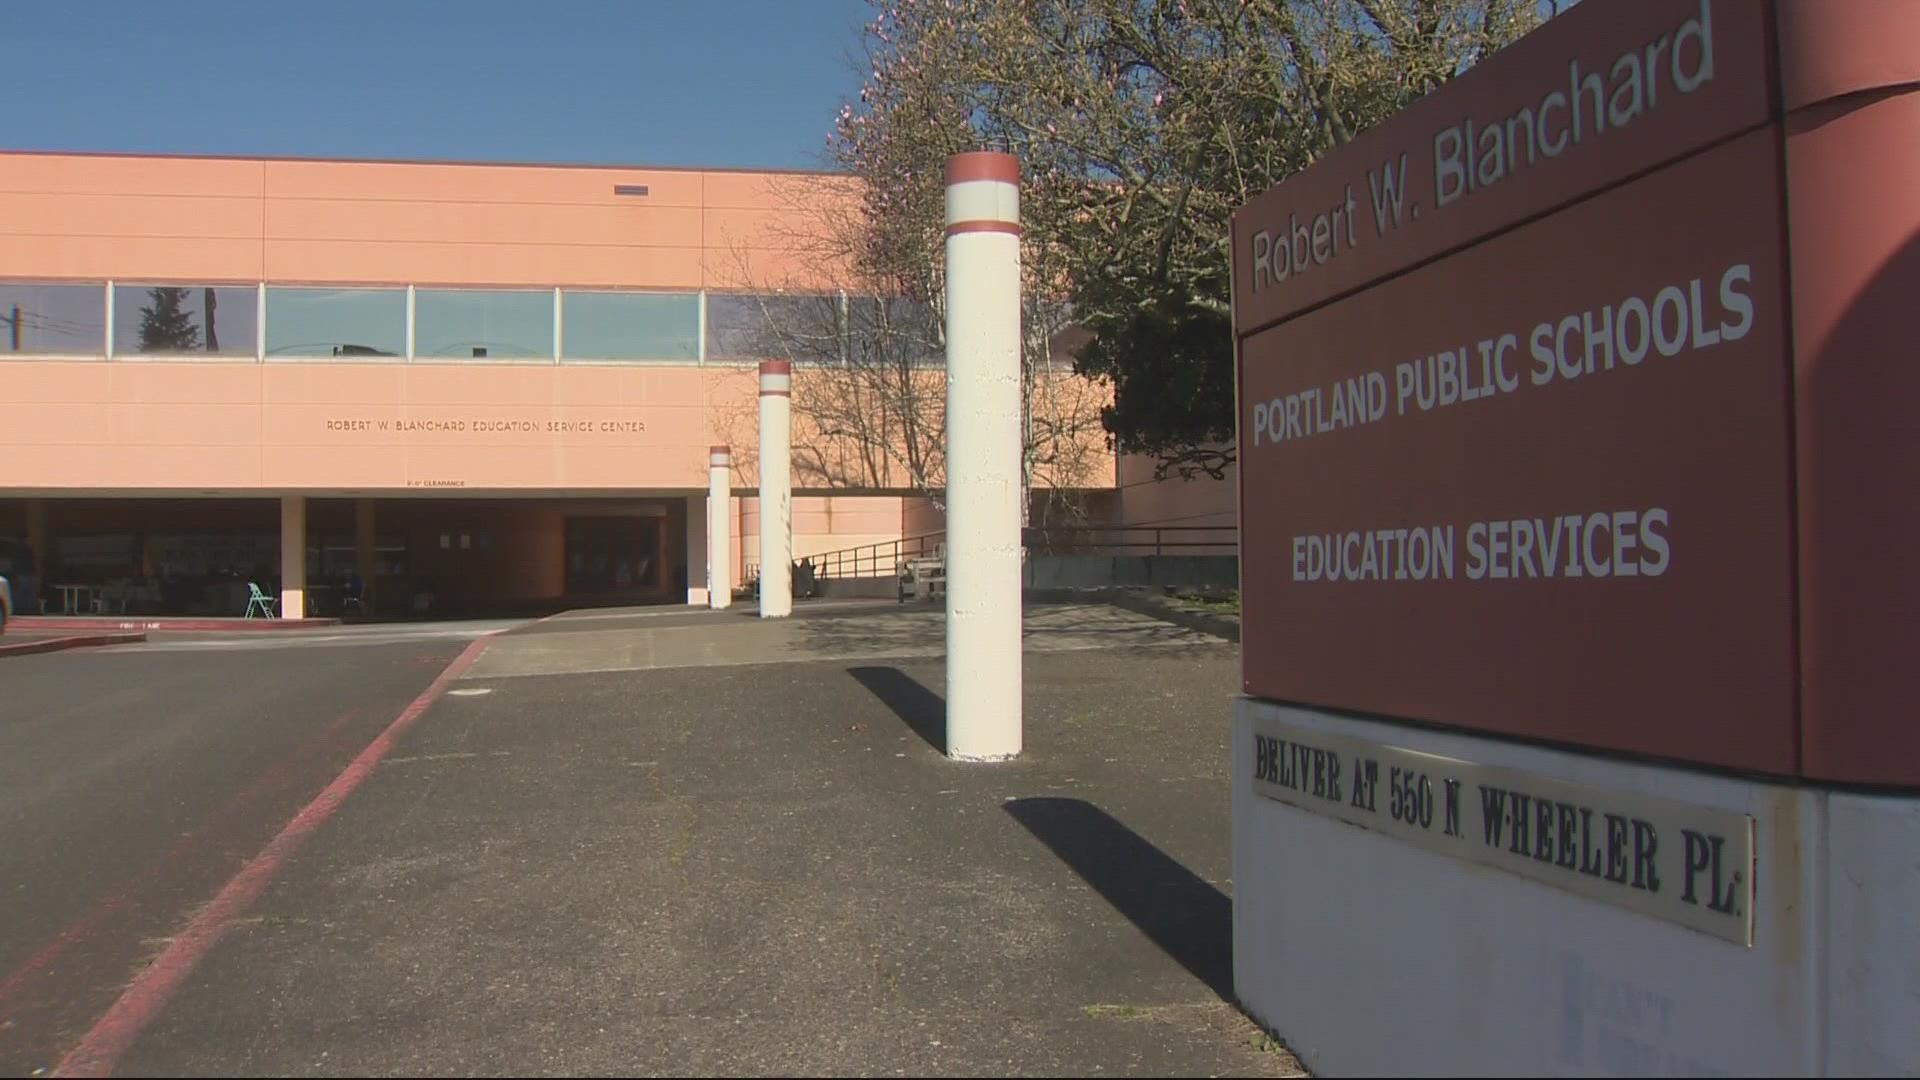 A proposed budget would cut about 26 positions from Portland Public Schools' special education programs. That has some parents and teachers worried.